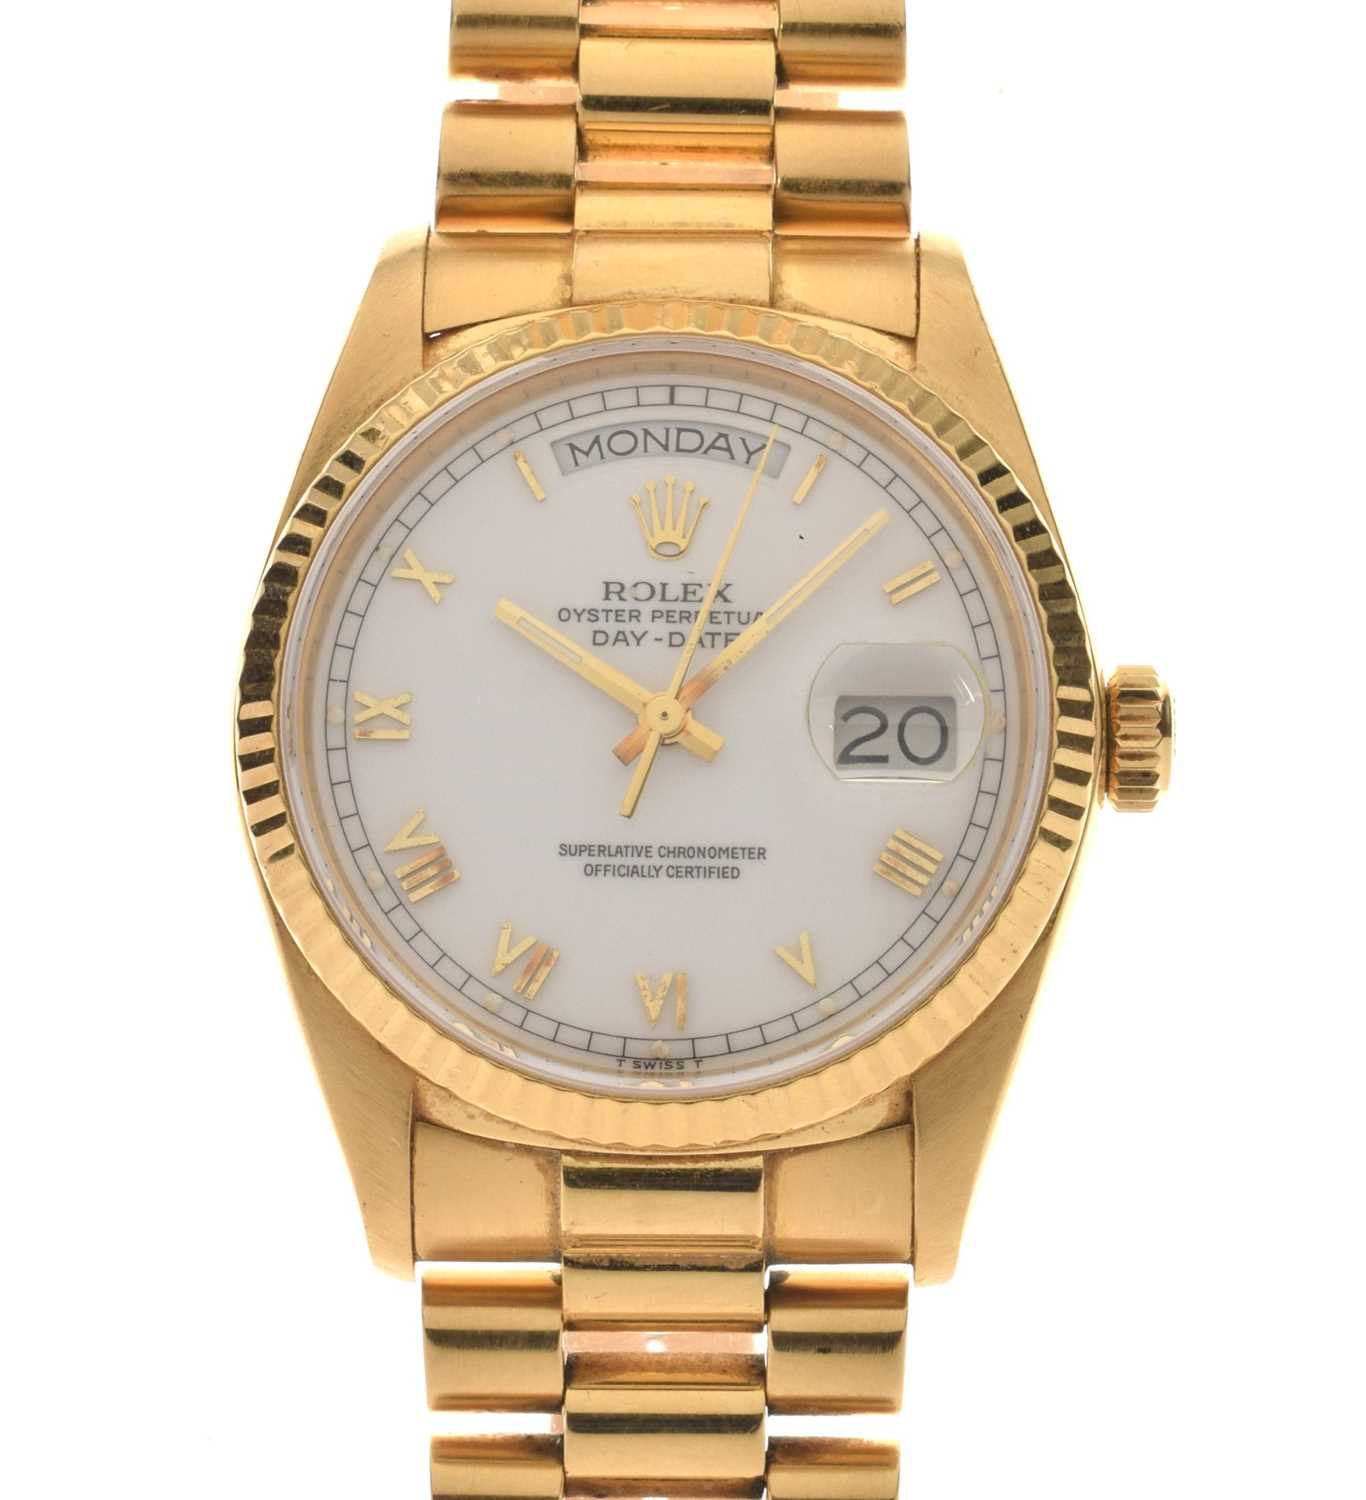 Rolex - Gentleman's 18ct gold Oyster Perpetual Day Date wristwatch